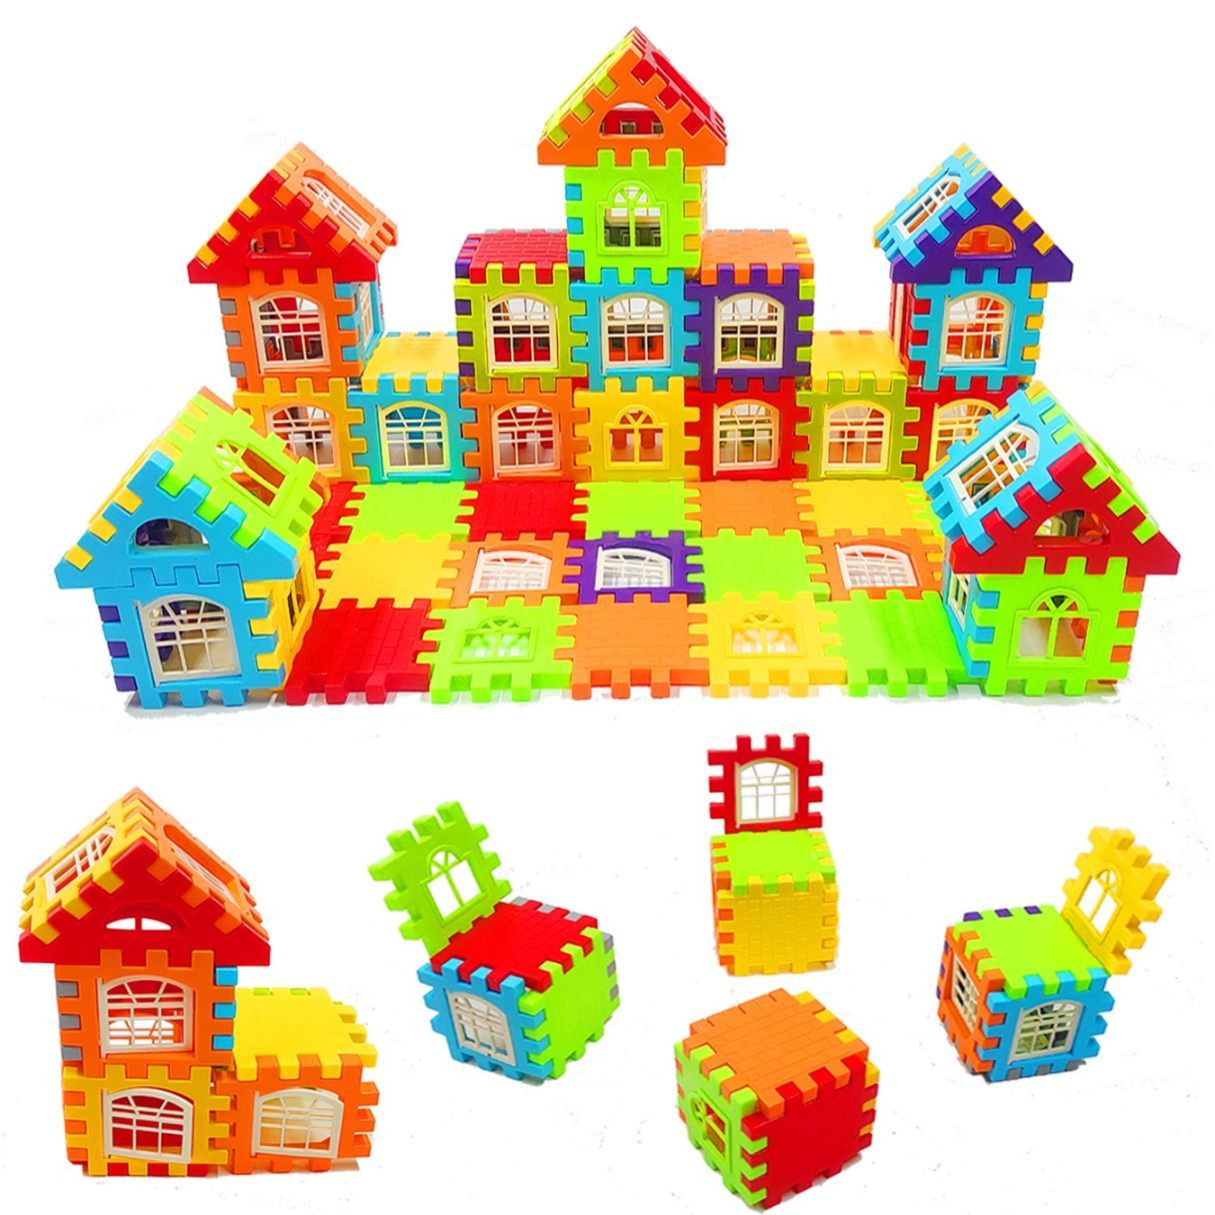 150 PCS Building Blocks @ ₹ 299 Including Attractive Windows Medium Sized Happy Home House Building Blocks with Smooth Rounded Edges, Toys for Kids, Multicolour